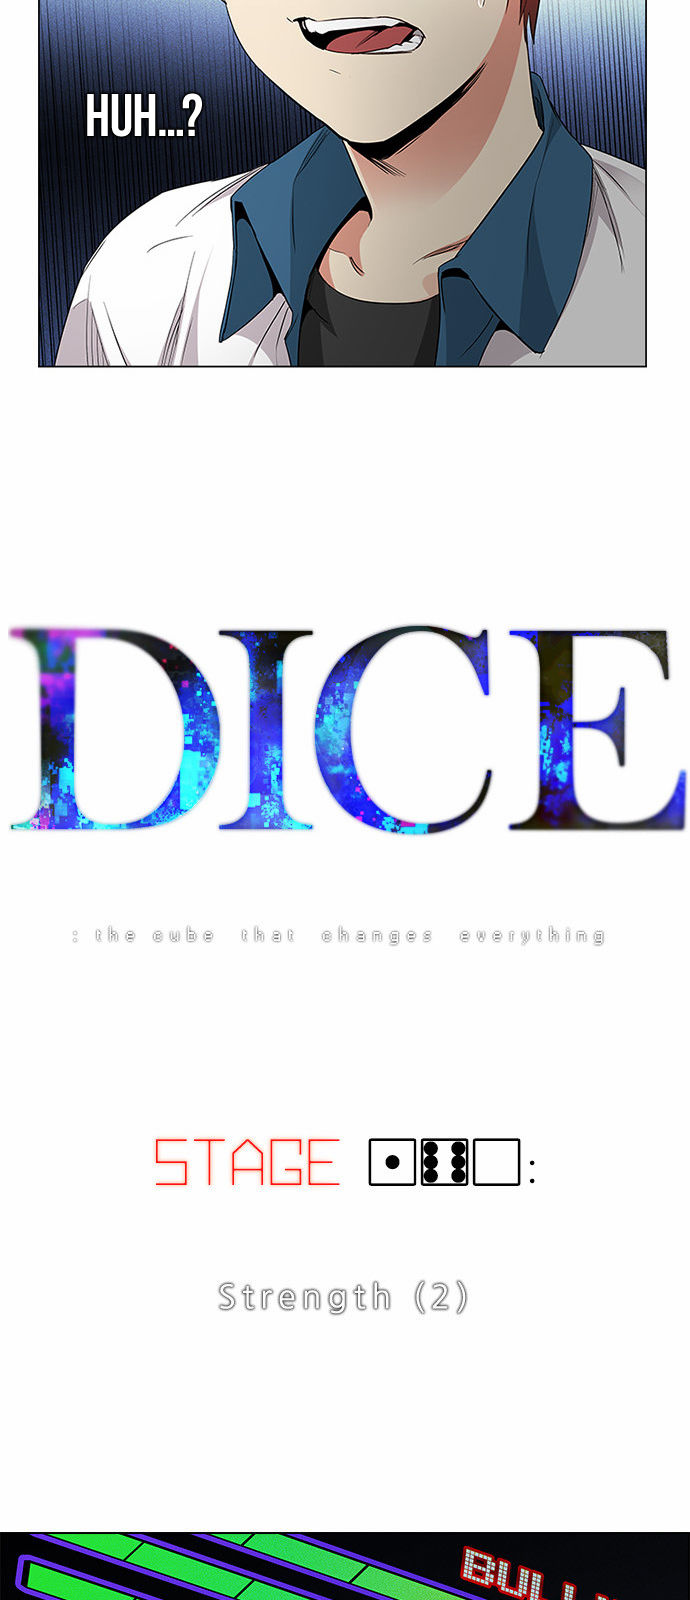 DICE: The Cube that Changes Everything 160